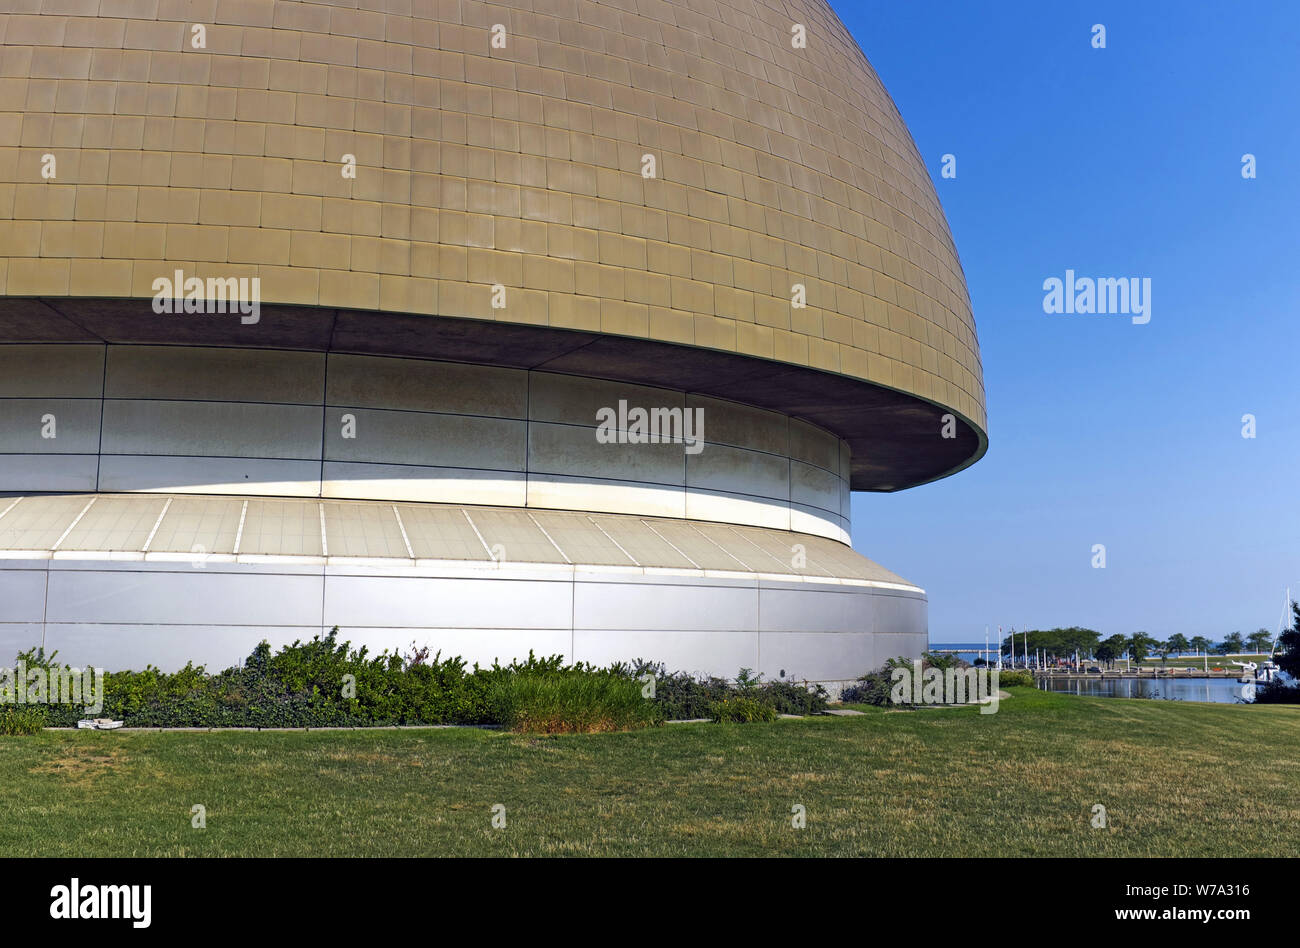 Unique shape of the exterior of the Great Lakes Science Center dome theater in the Northcoast Harbor of Cleveland, Ohio, USA. Stock Photo